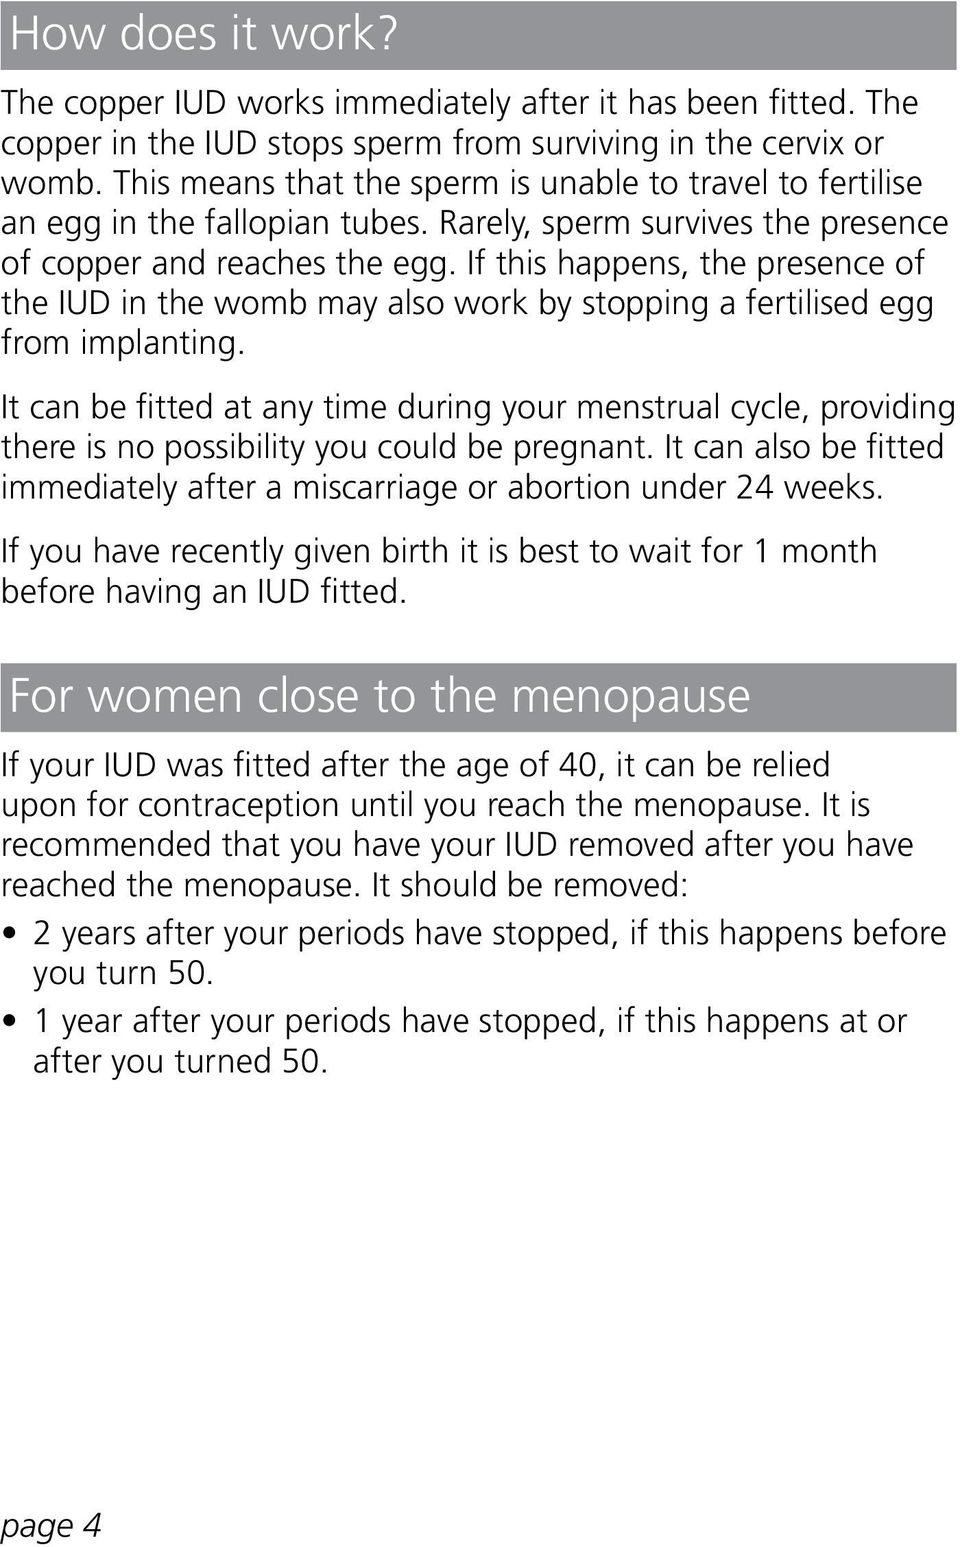 If this happens, the presence of the IUD in the womb may also work by stopping a fertilised egg from implanting.